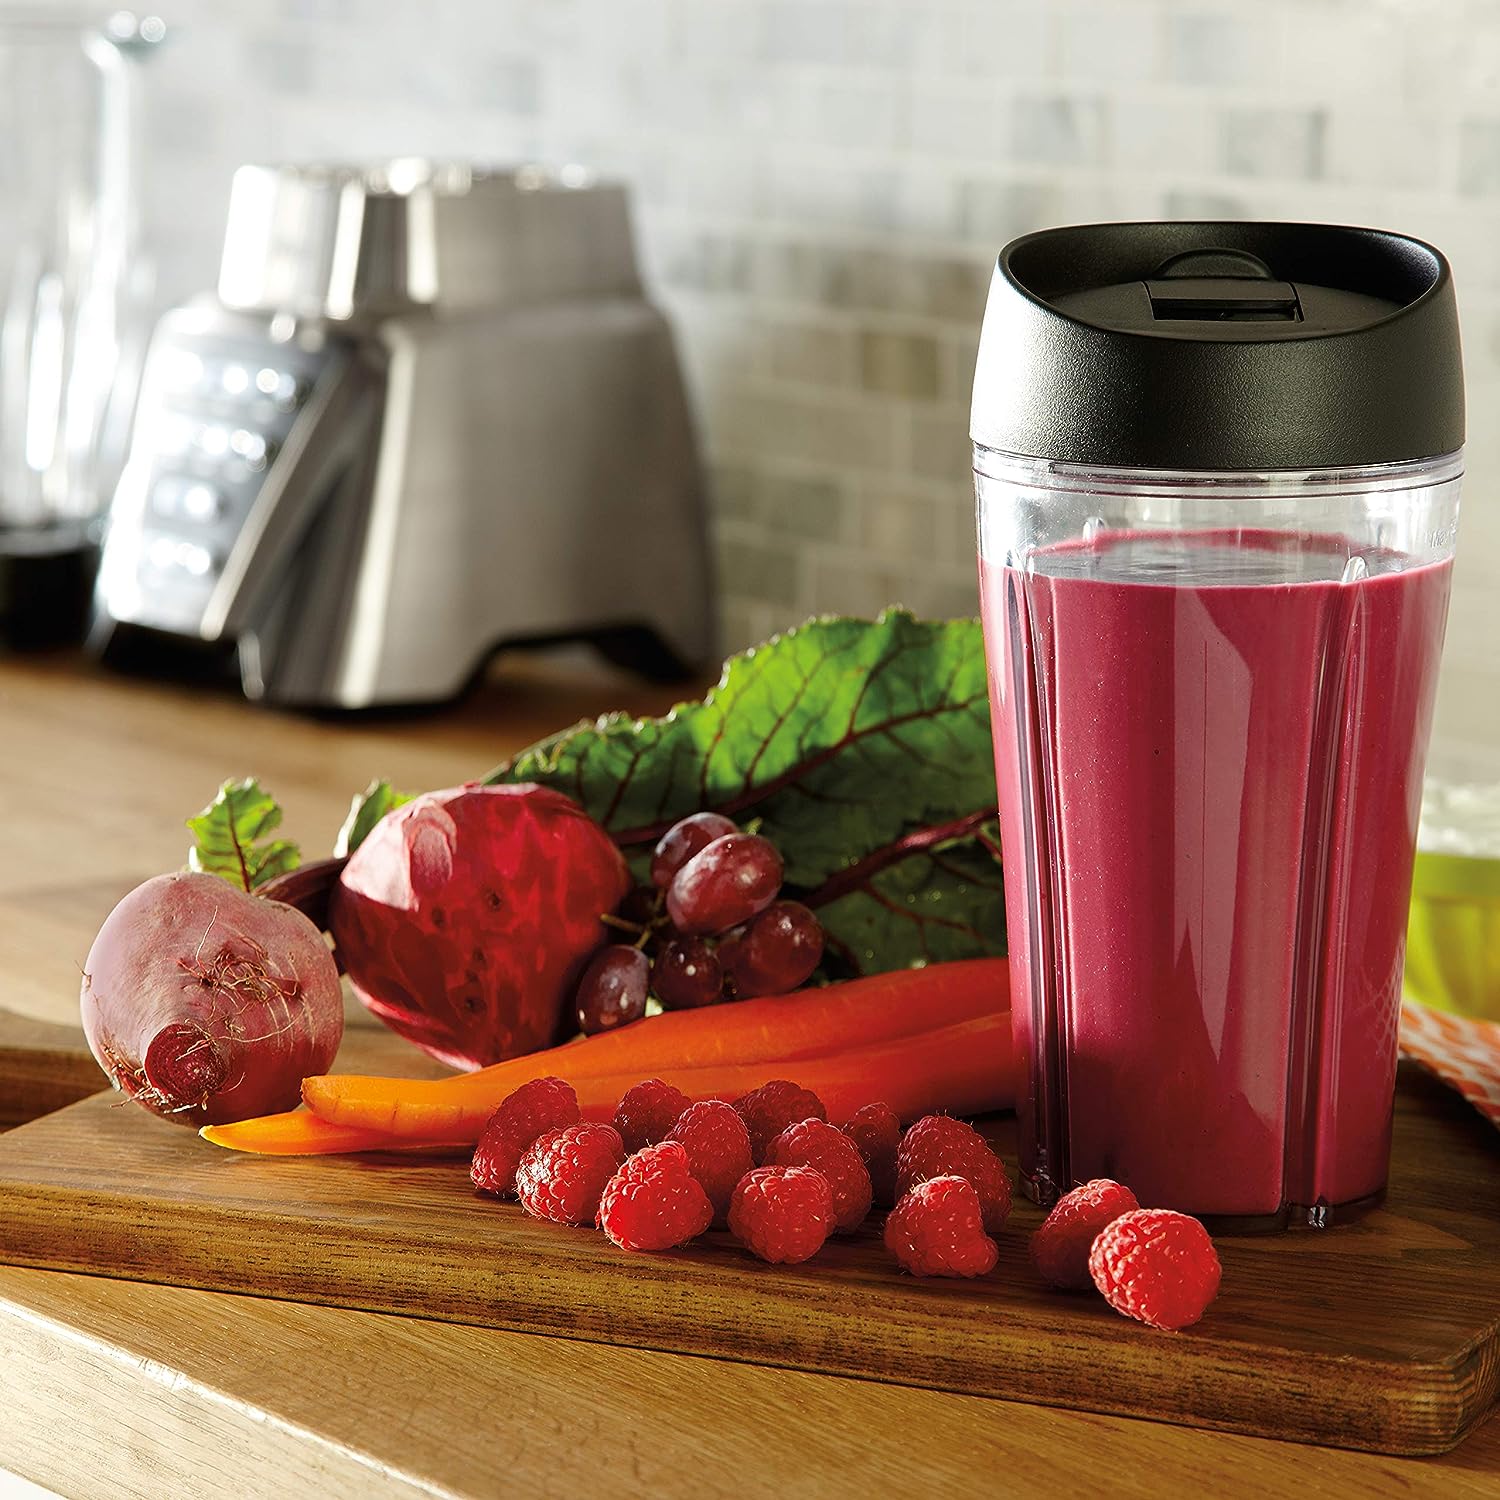 Oster Blender  Pro 1200 with Glass Jar, 24-Ounce Smoothie Cup